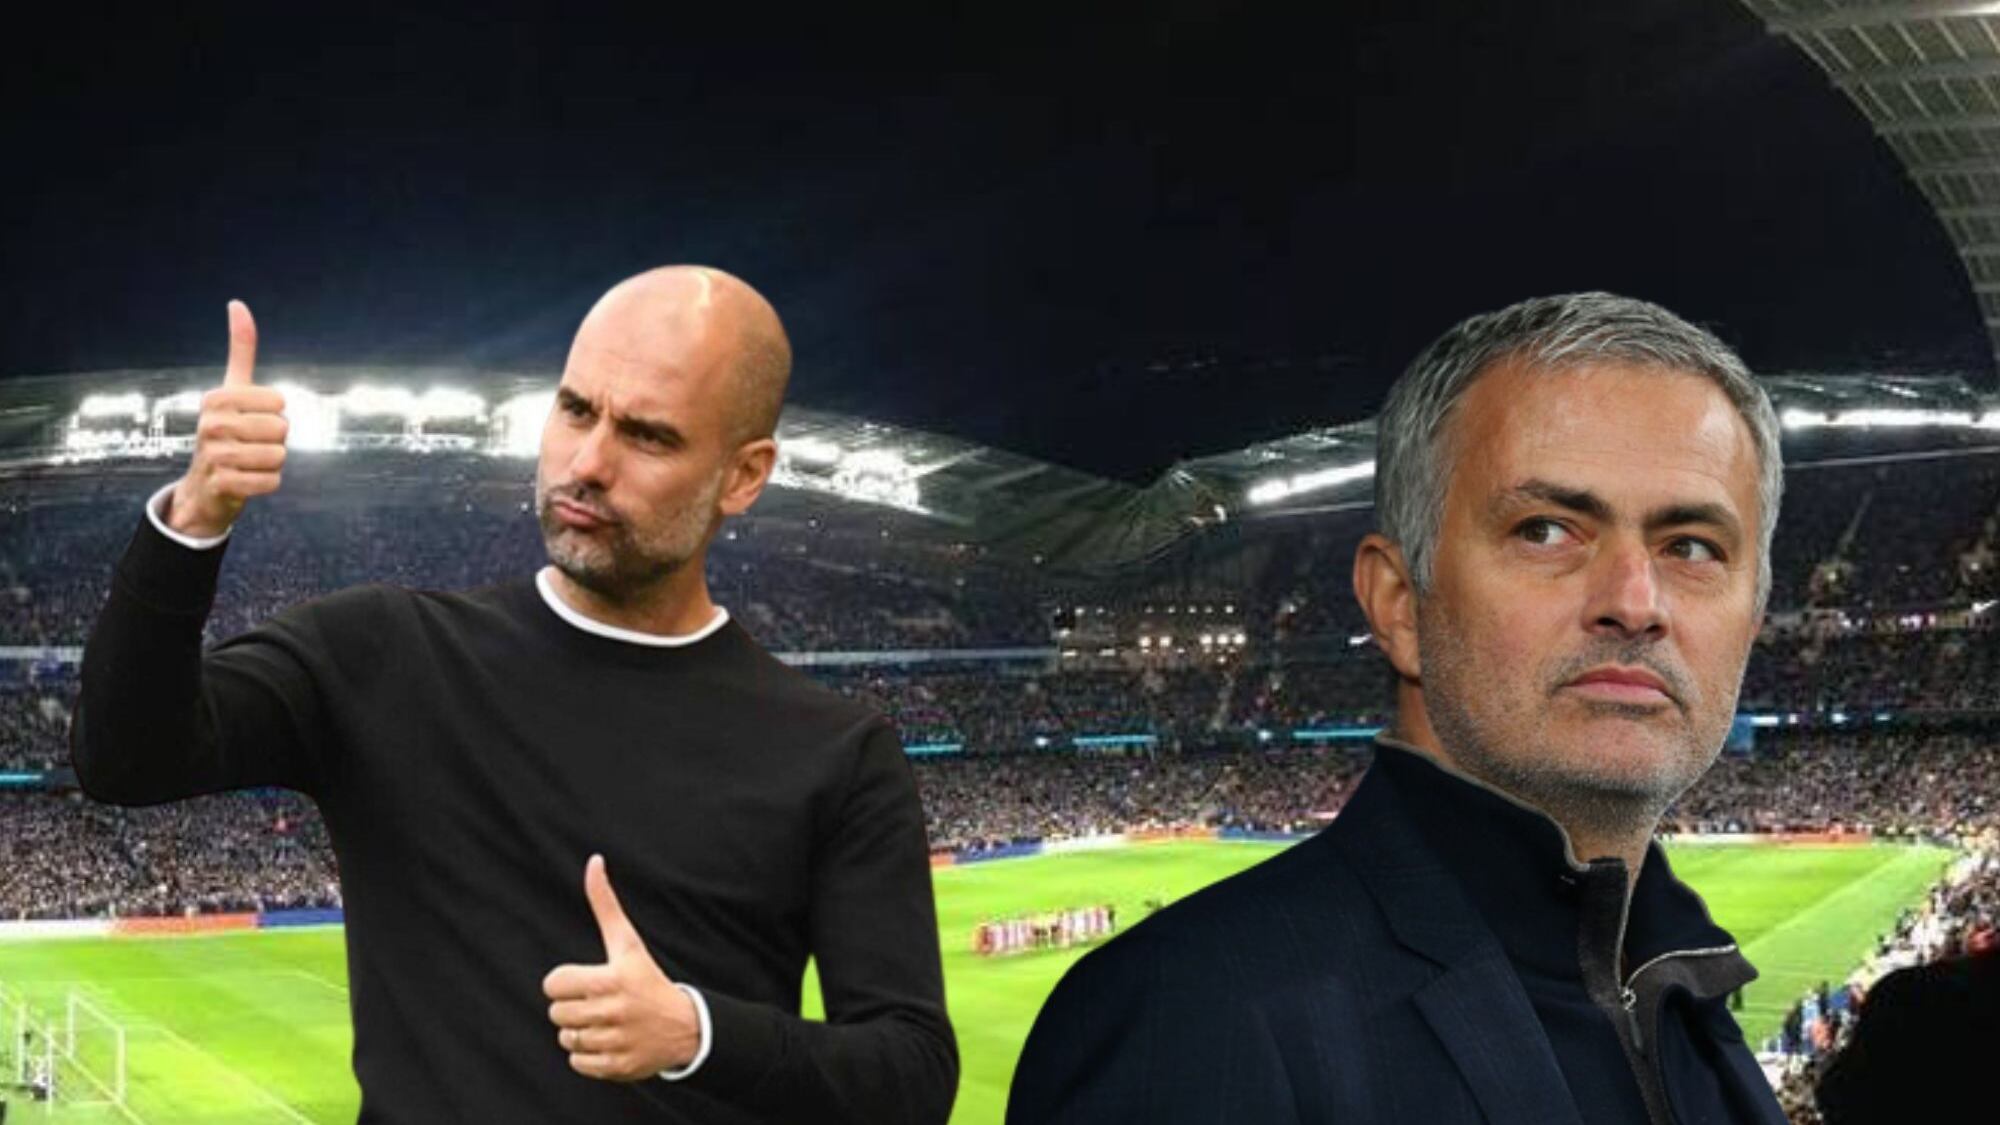 Pep Guardiola chose the coach who is his strongest rival, it is not Mourinho